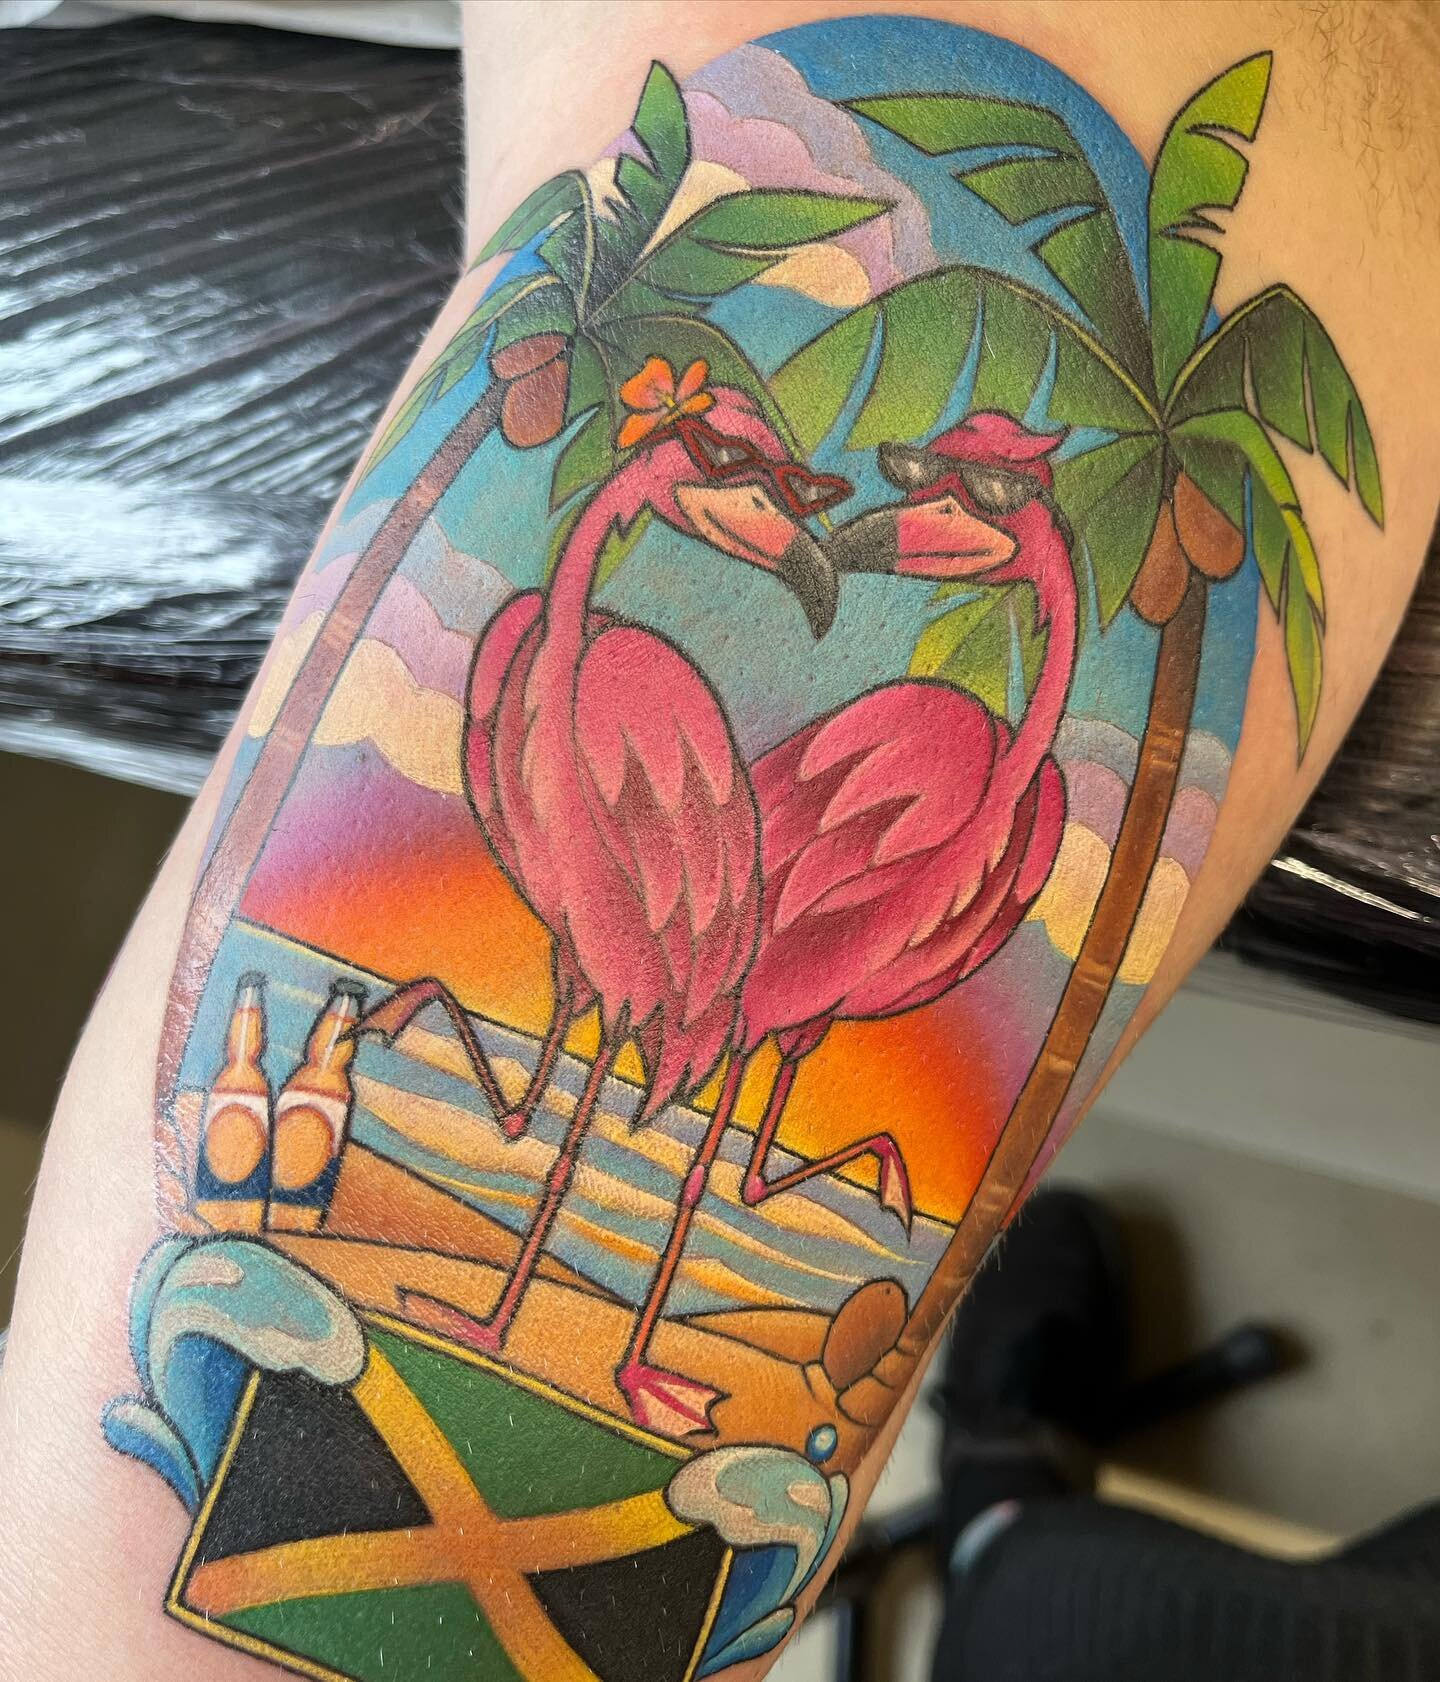 For Gareth 😊
Part healed, part fresh ☀️🍺🌴 #couplegoals

Made with the best @fusion_ink 
Supplies from @killerinktattoo
Made in Edinburgh 🏴󠁧󠁢󠁳󠁣󠁴󠁿 
(I also really like @kwadron cartridges)

Now booking May and June 2024 💫

@michellemaddison
